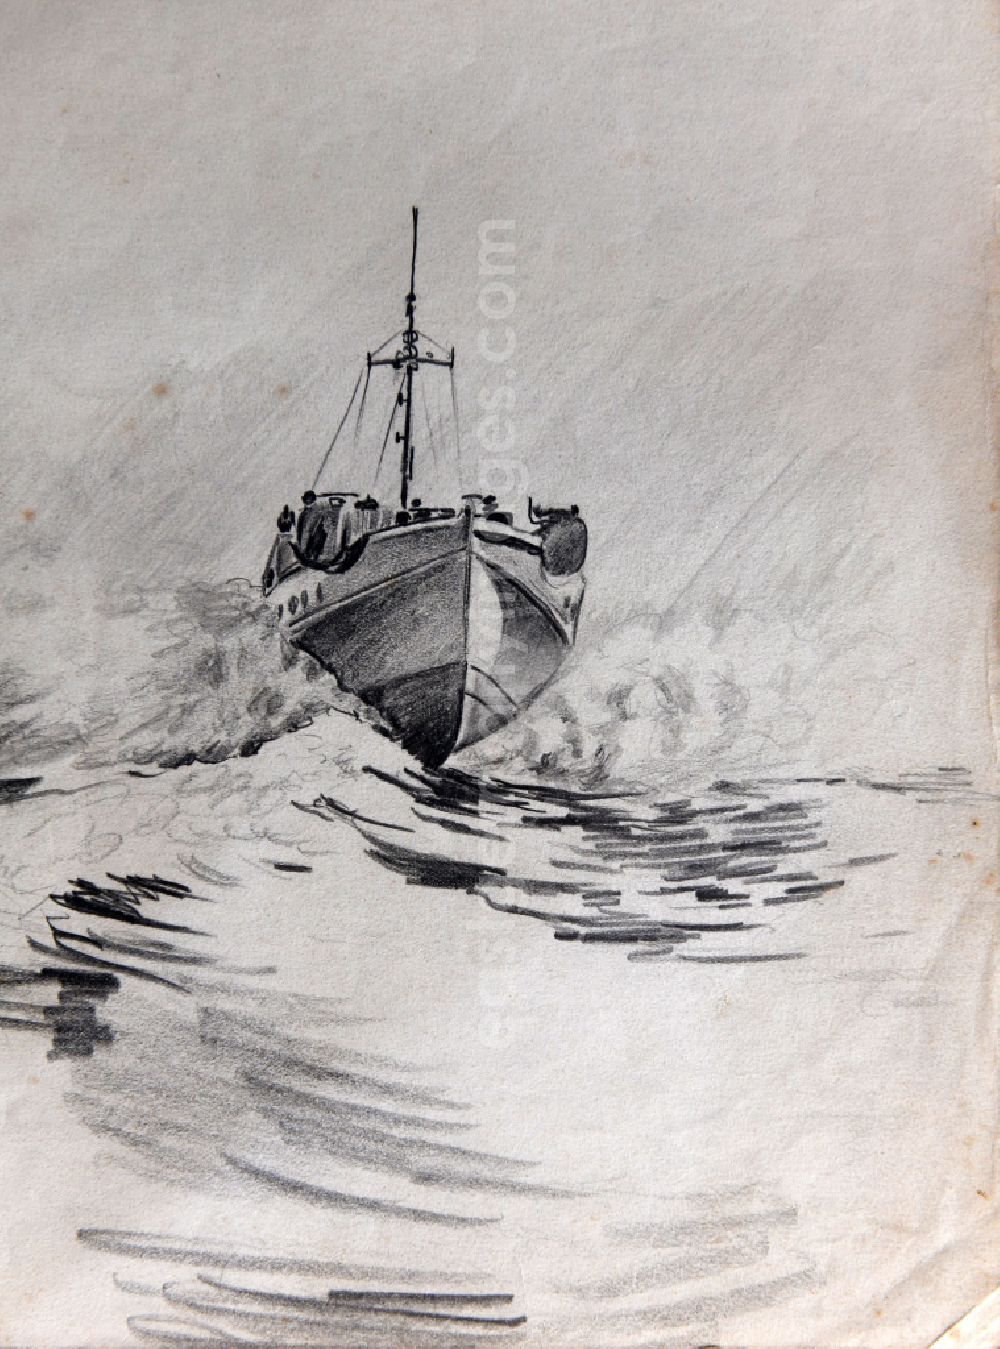 GDR photo archive: Stralsund - VG picture free work: pencil drawing Torpedo speedboat of the People's Navy on the Baltic Sea by the artist Siegfried Gebser in Stralsund in the state Mecklenburg-Western Pomerania on the territory of the former GDR, German Democratic Republic